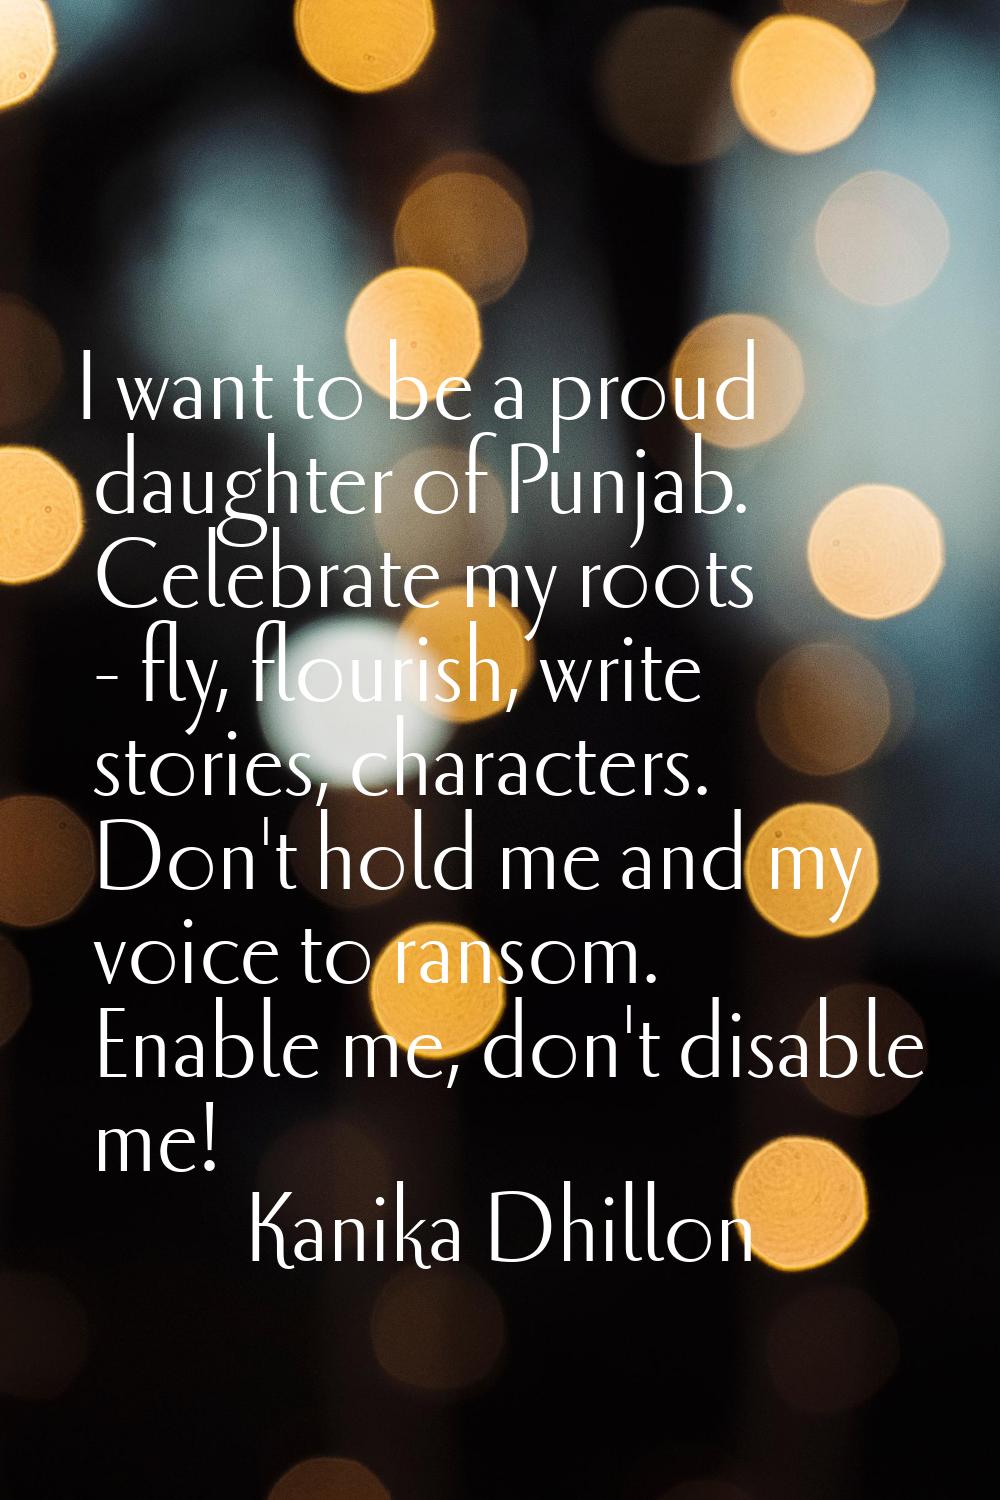 I want to be a proud daughter of Punjab. Celebrate my roots - fly, flourish, write stories, charact